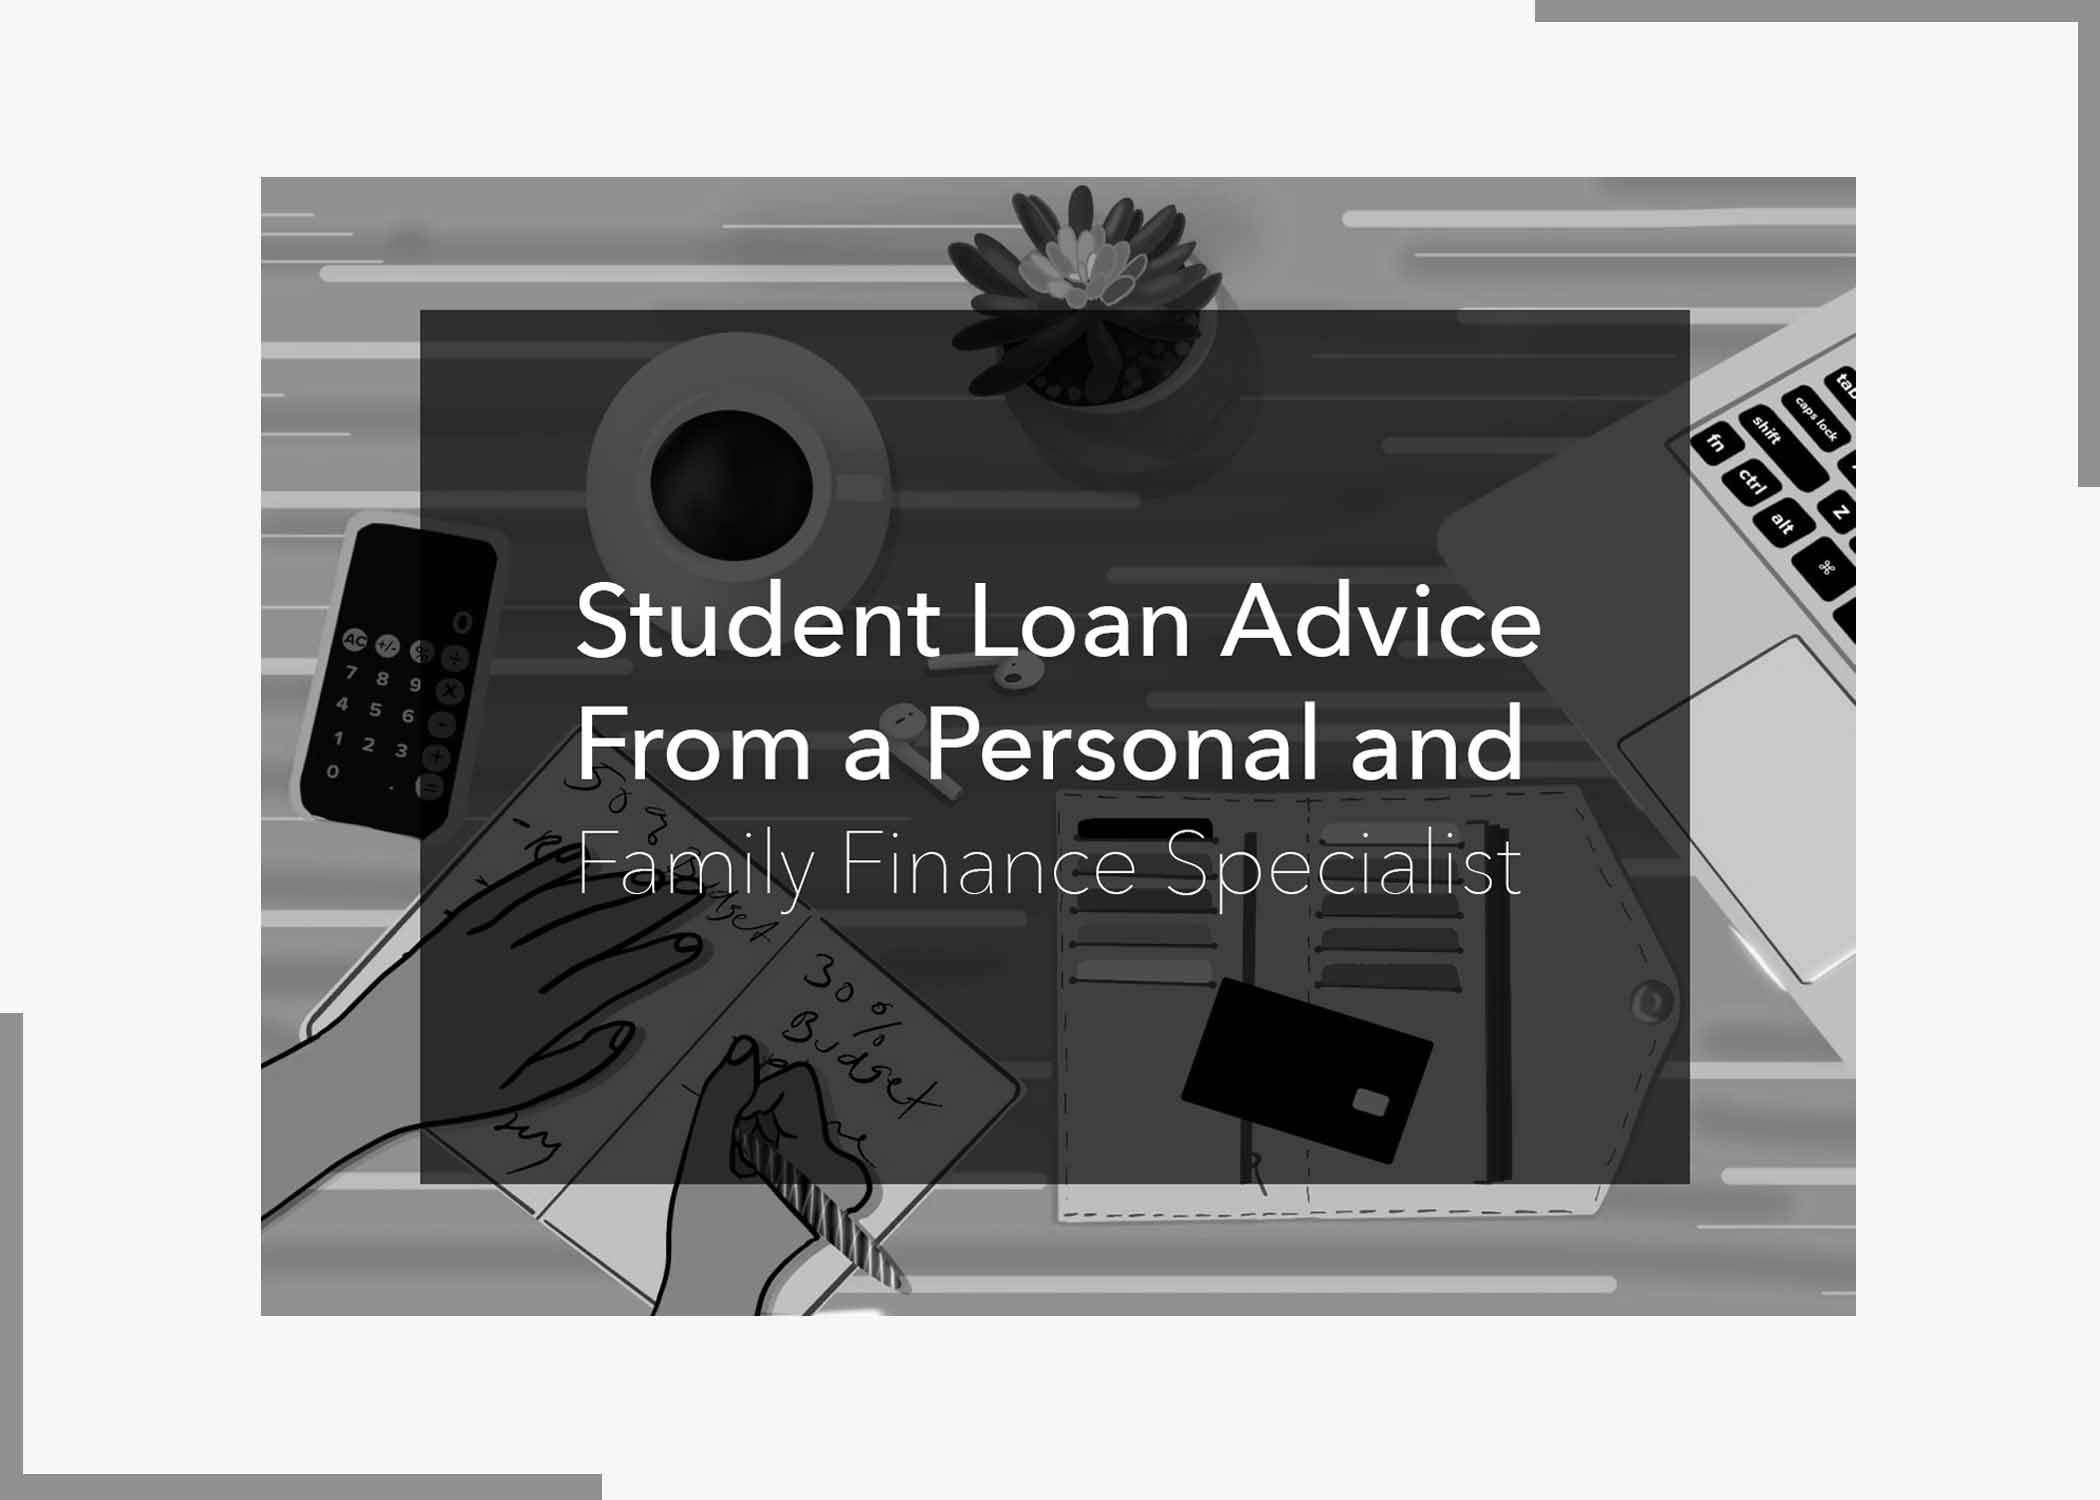 Student Loan Advice From a Personal and Family Finance Specialist